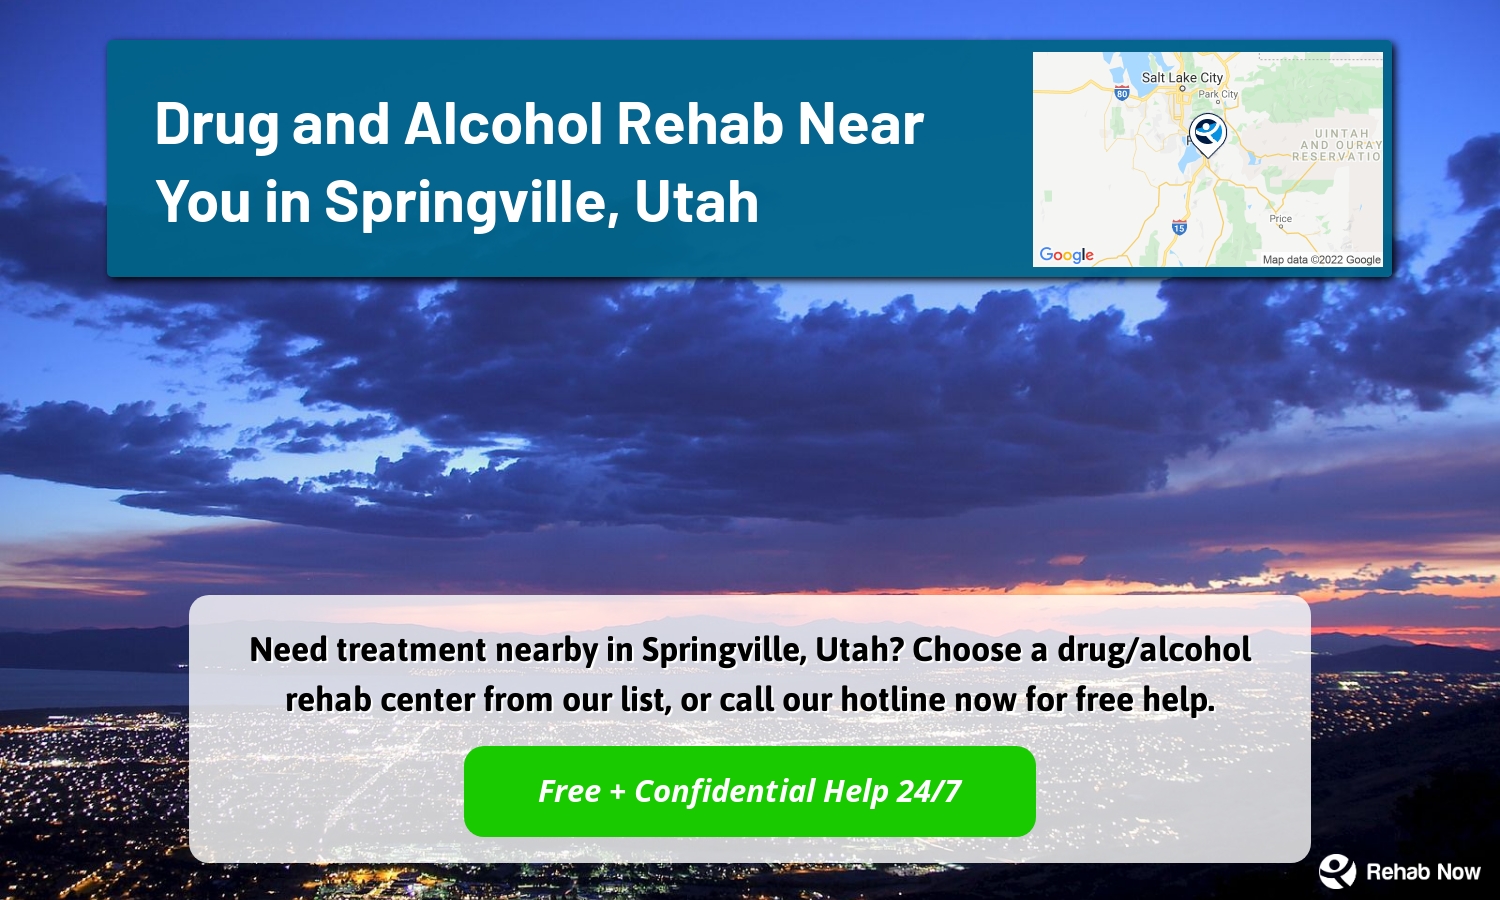 Need treatment nearby in Springville, Utah? Choose a drug/alcohol rehab center from our list, or call our hotline now for free help.